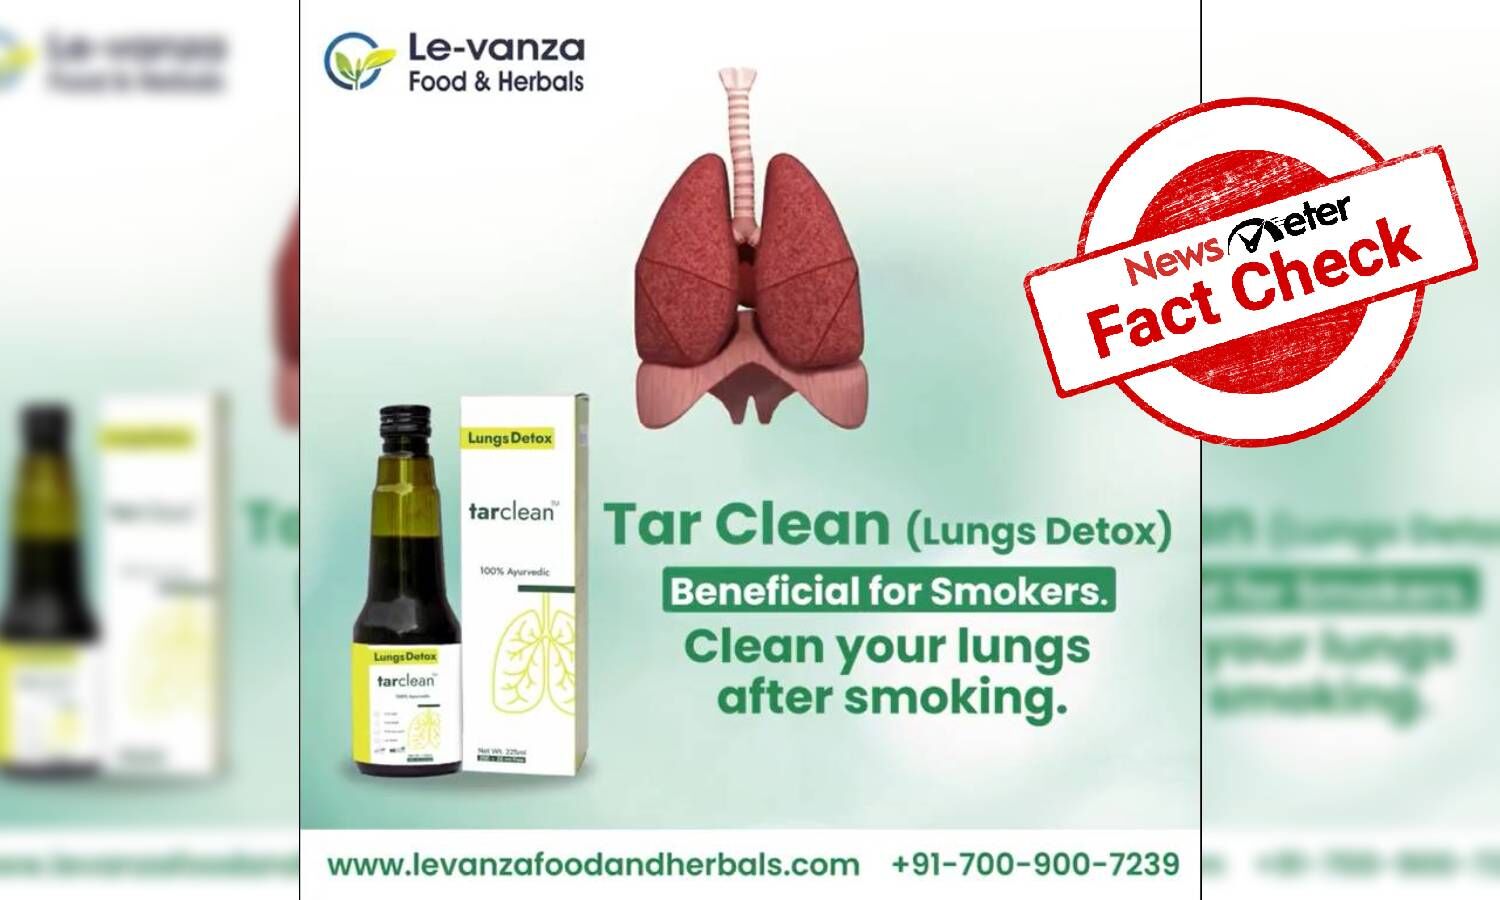 Detox lungs while you continue smoking: False claim goes viral